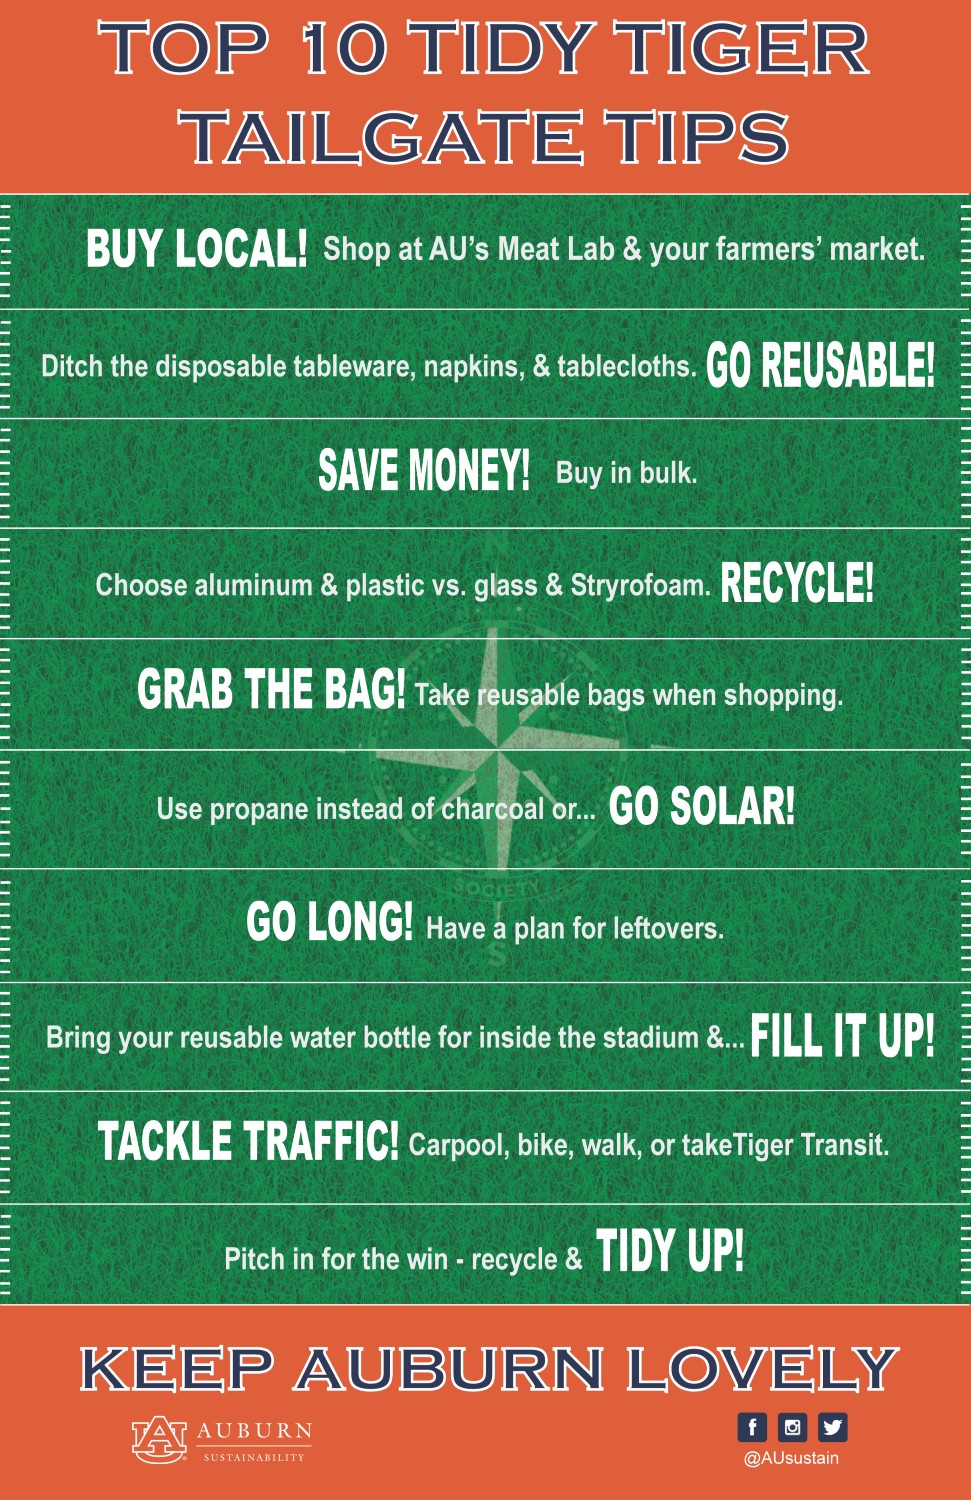 Graphic with Top 10 Tidy Tiger Tailgate Tips